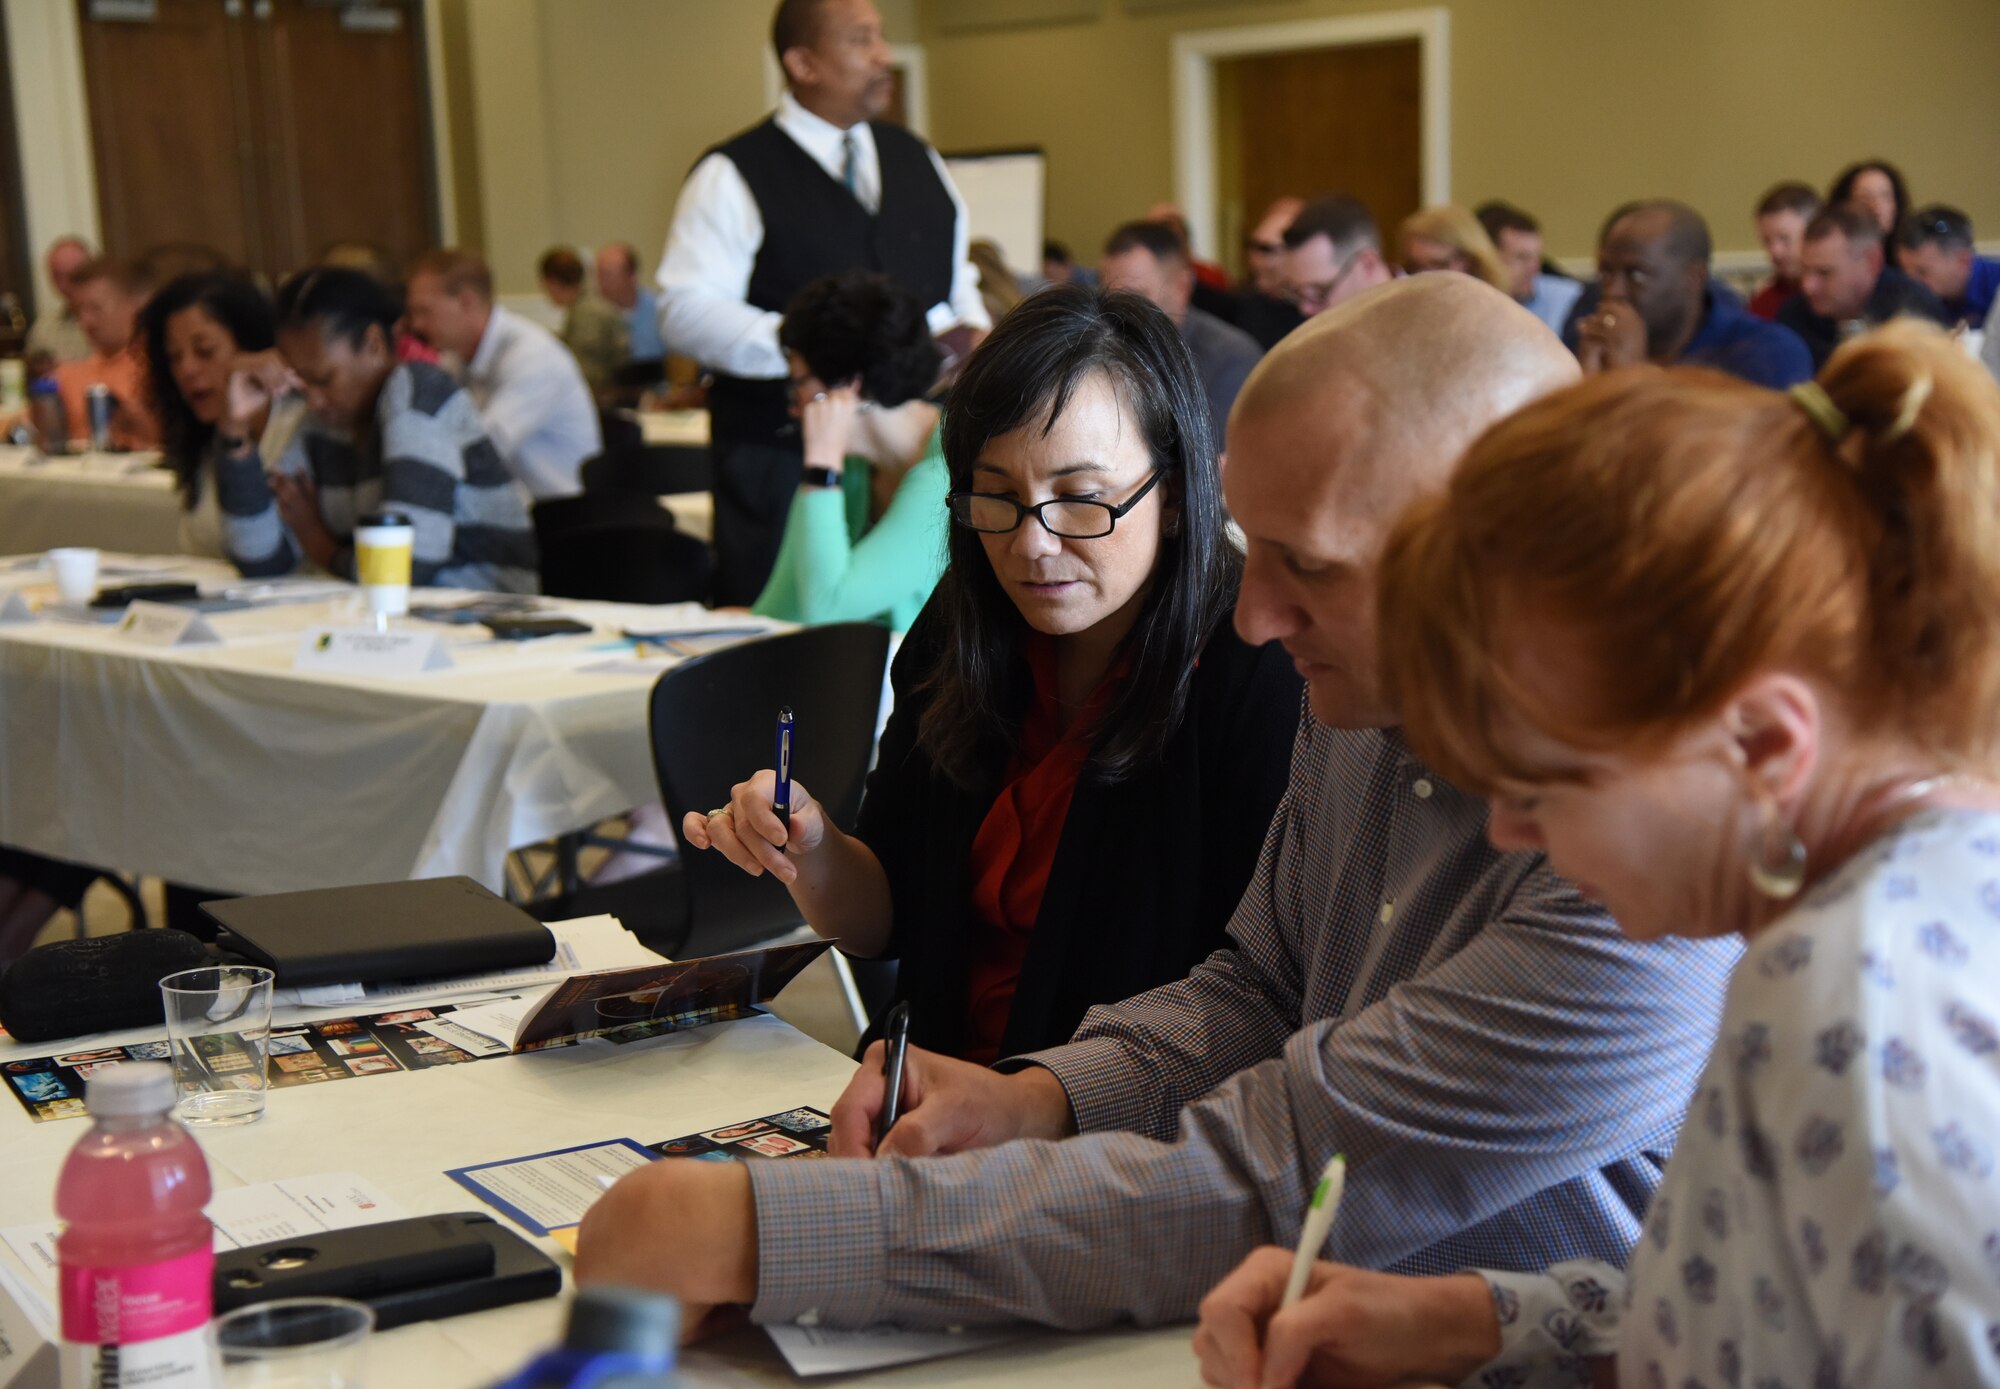 U.S. Air Force Col. Debra Lovette, 81st Training Wing commander, and Chief Master Sgt. Kenneth Carter, 81st TRW command chief, participate in a personality assessment project during the 81st TRW Spring 2018 Off-Site Commander’s Conference at The Salvation Army Kroc Center in Biloxi, Mississippi, May 2, 2018. Keesler leaders were provided with a “Mindfulness & Human Performance Culture” seminar and participated in small group discussions and presentations. (U.S. Air Force photo by Kemberly Groue)